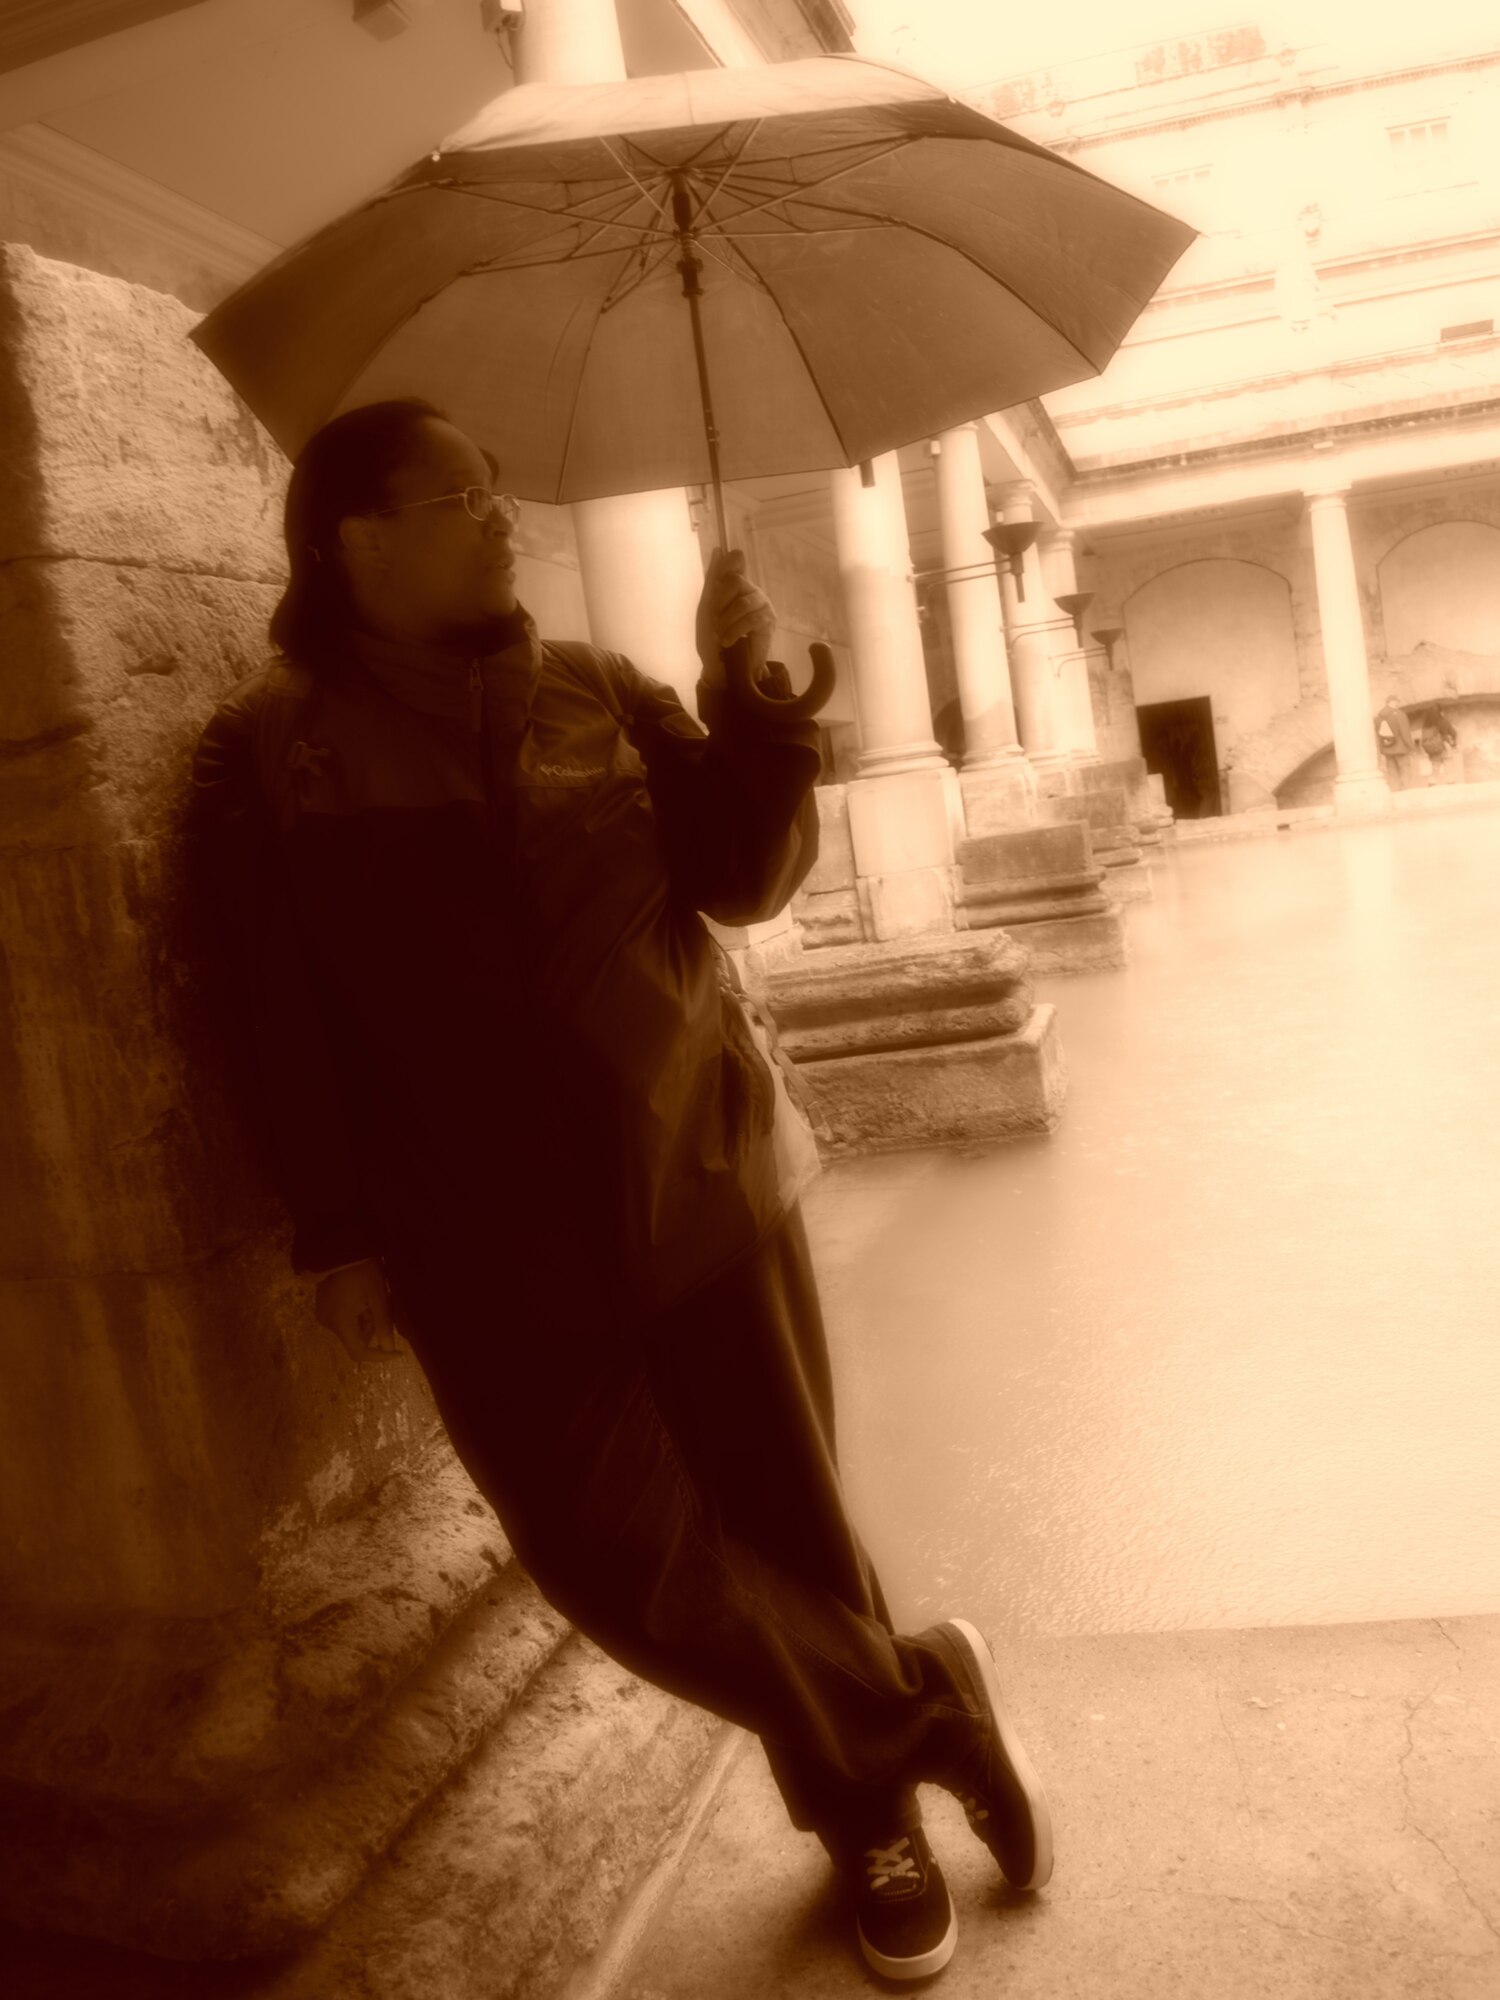 Candy Knight, Public Affairs Specialist for Headquarters Fourth Air Force, relaxes during a visit to the Roman Baths in Bath, England. (Courtesy photo by Chief Master Sgt. April Lapetoda)